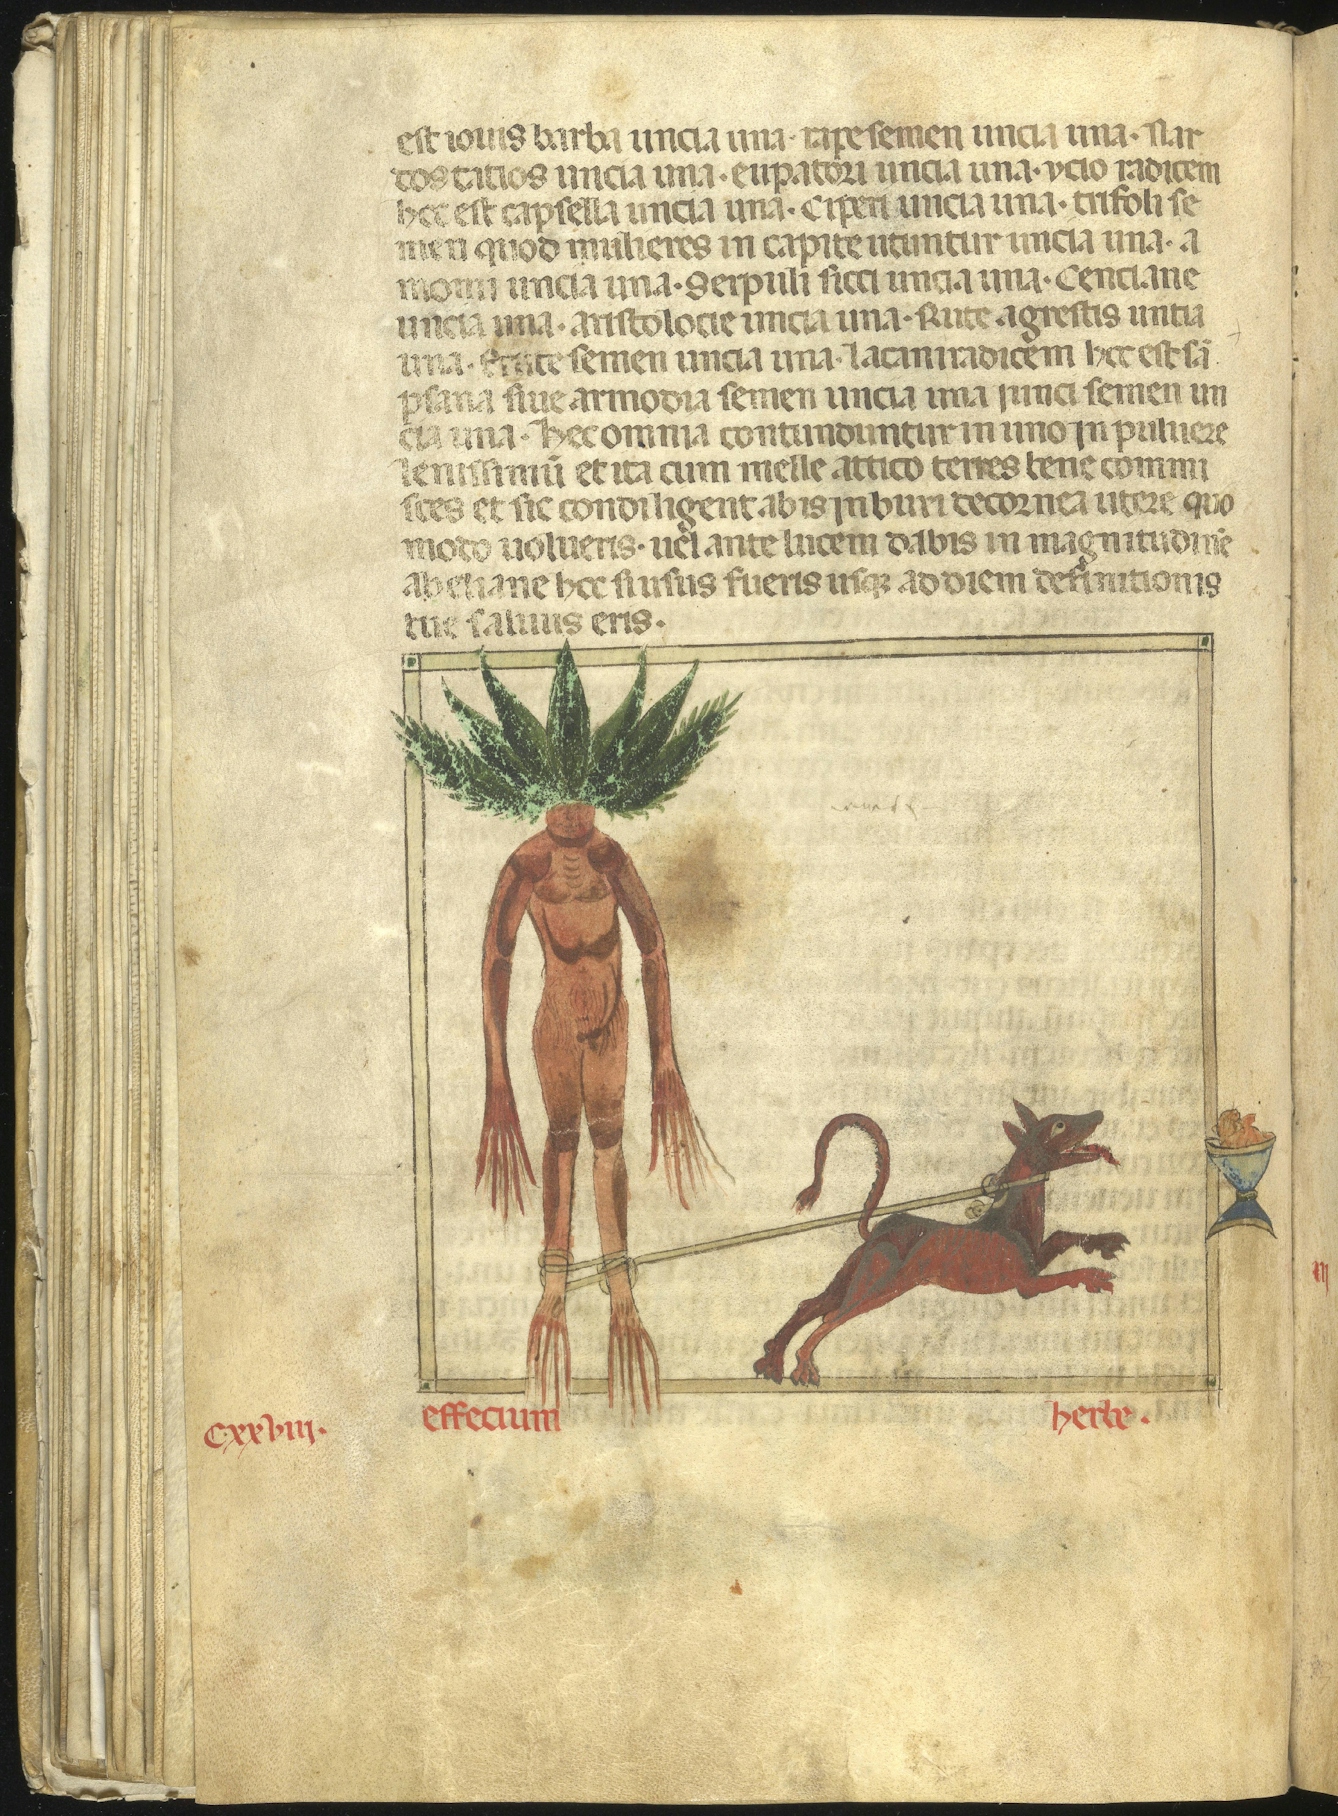 Page from a 13th century herbal. Half the page is latin text, the lower half is a humanoid mandrake root with a hungry dog tied to the plant's 'legs' by a rope. The dog is leaping towards a bowl of food.